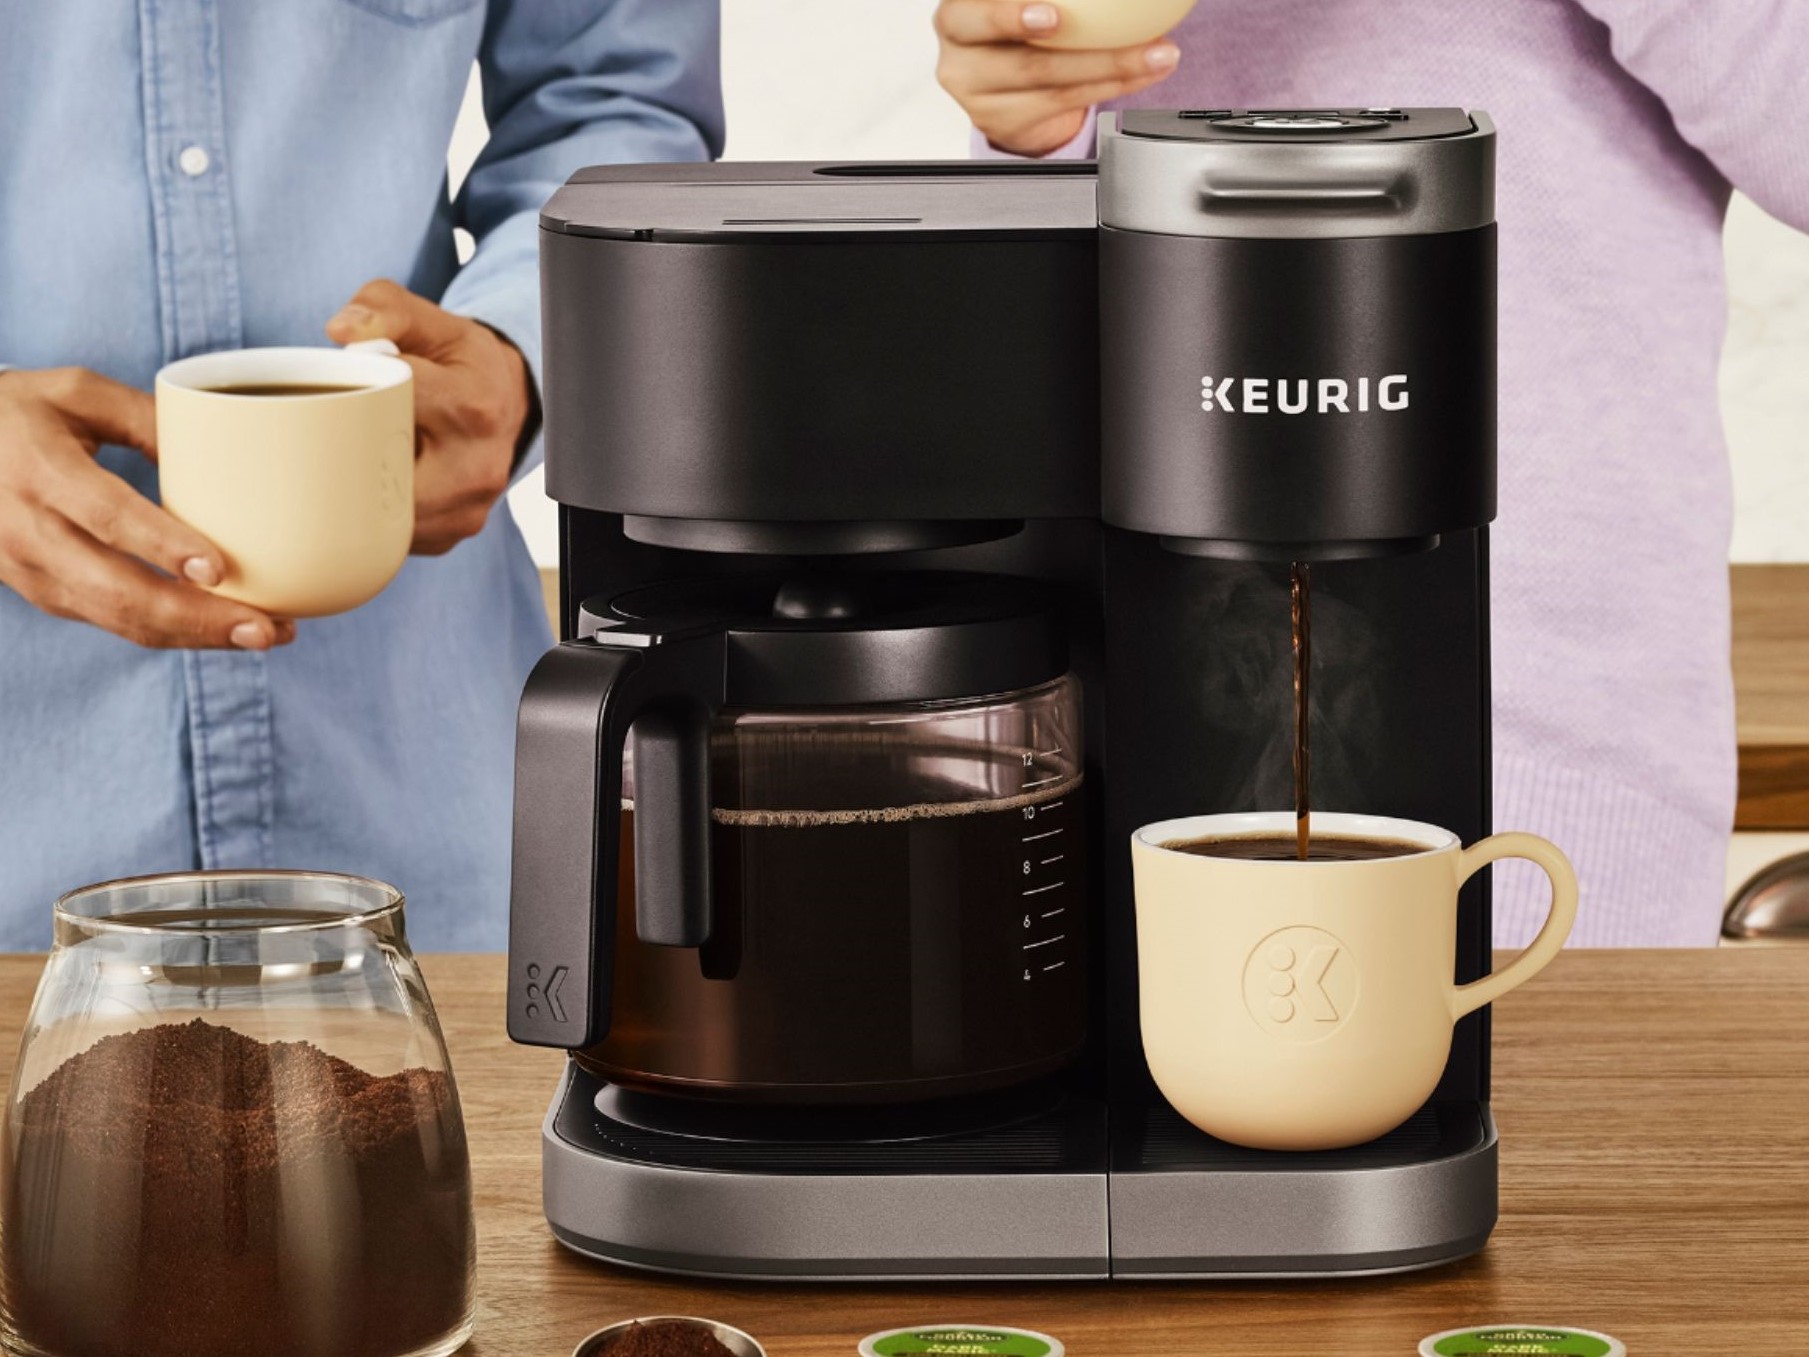 https://www.themanual.com/wp-content/uploads/sites/9/2021/08/keurig-k-duo-coffee-maker-brewing-a-cup.jpg?fit=1809%2C1357&p=1